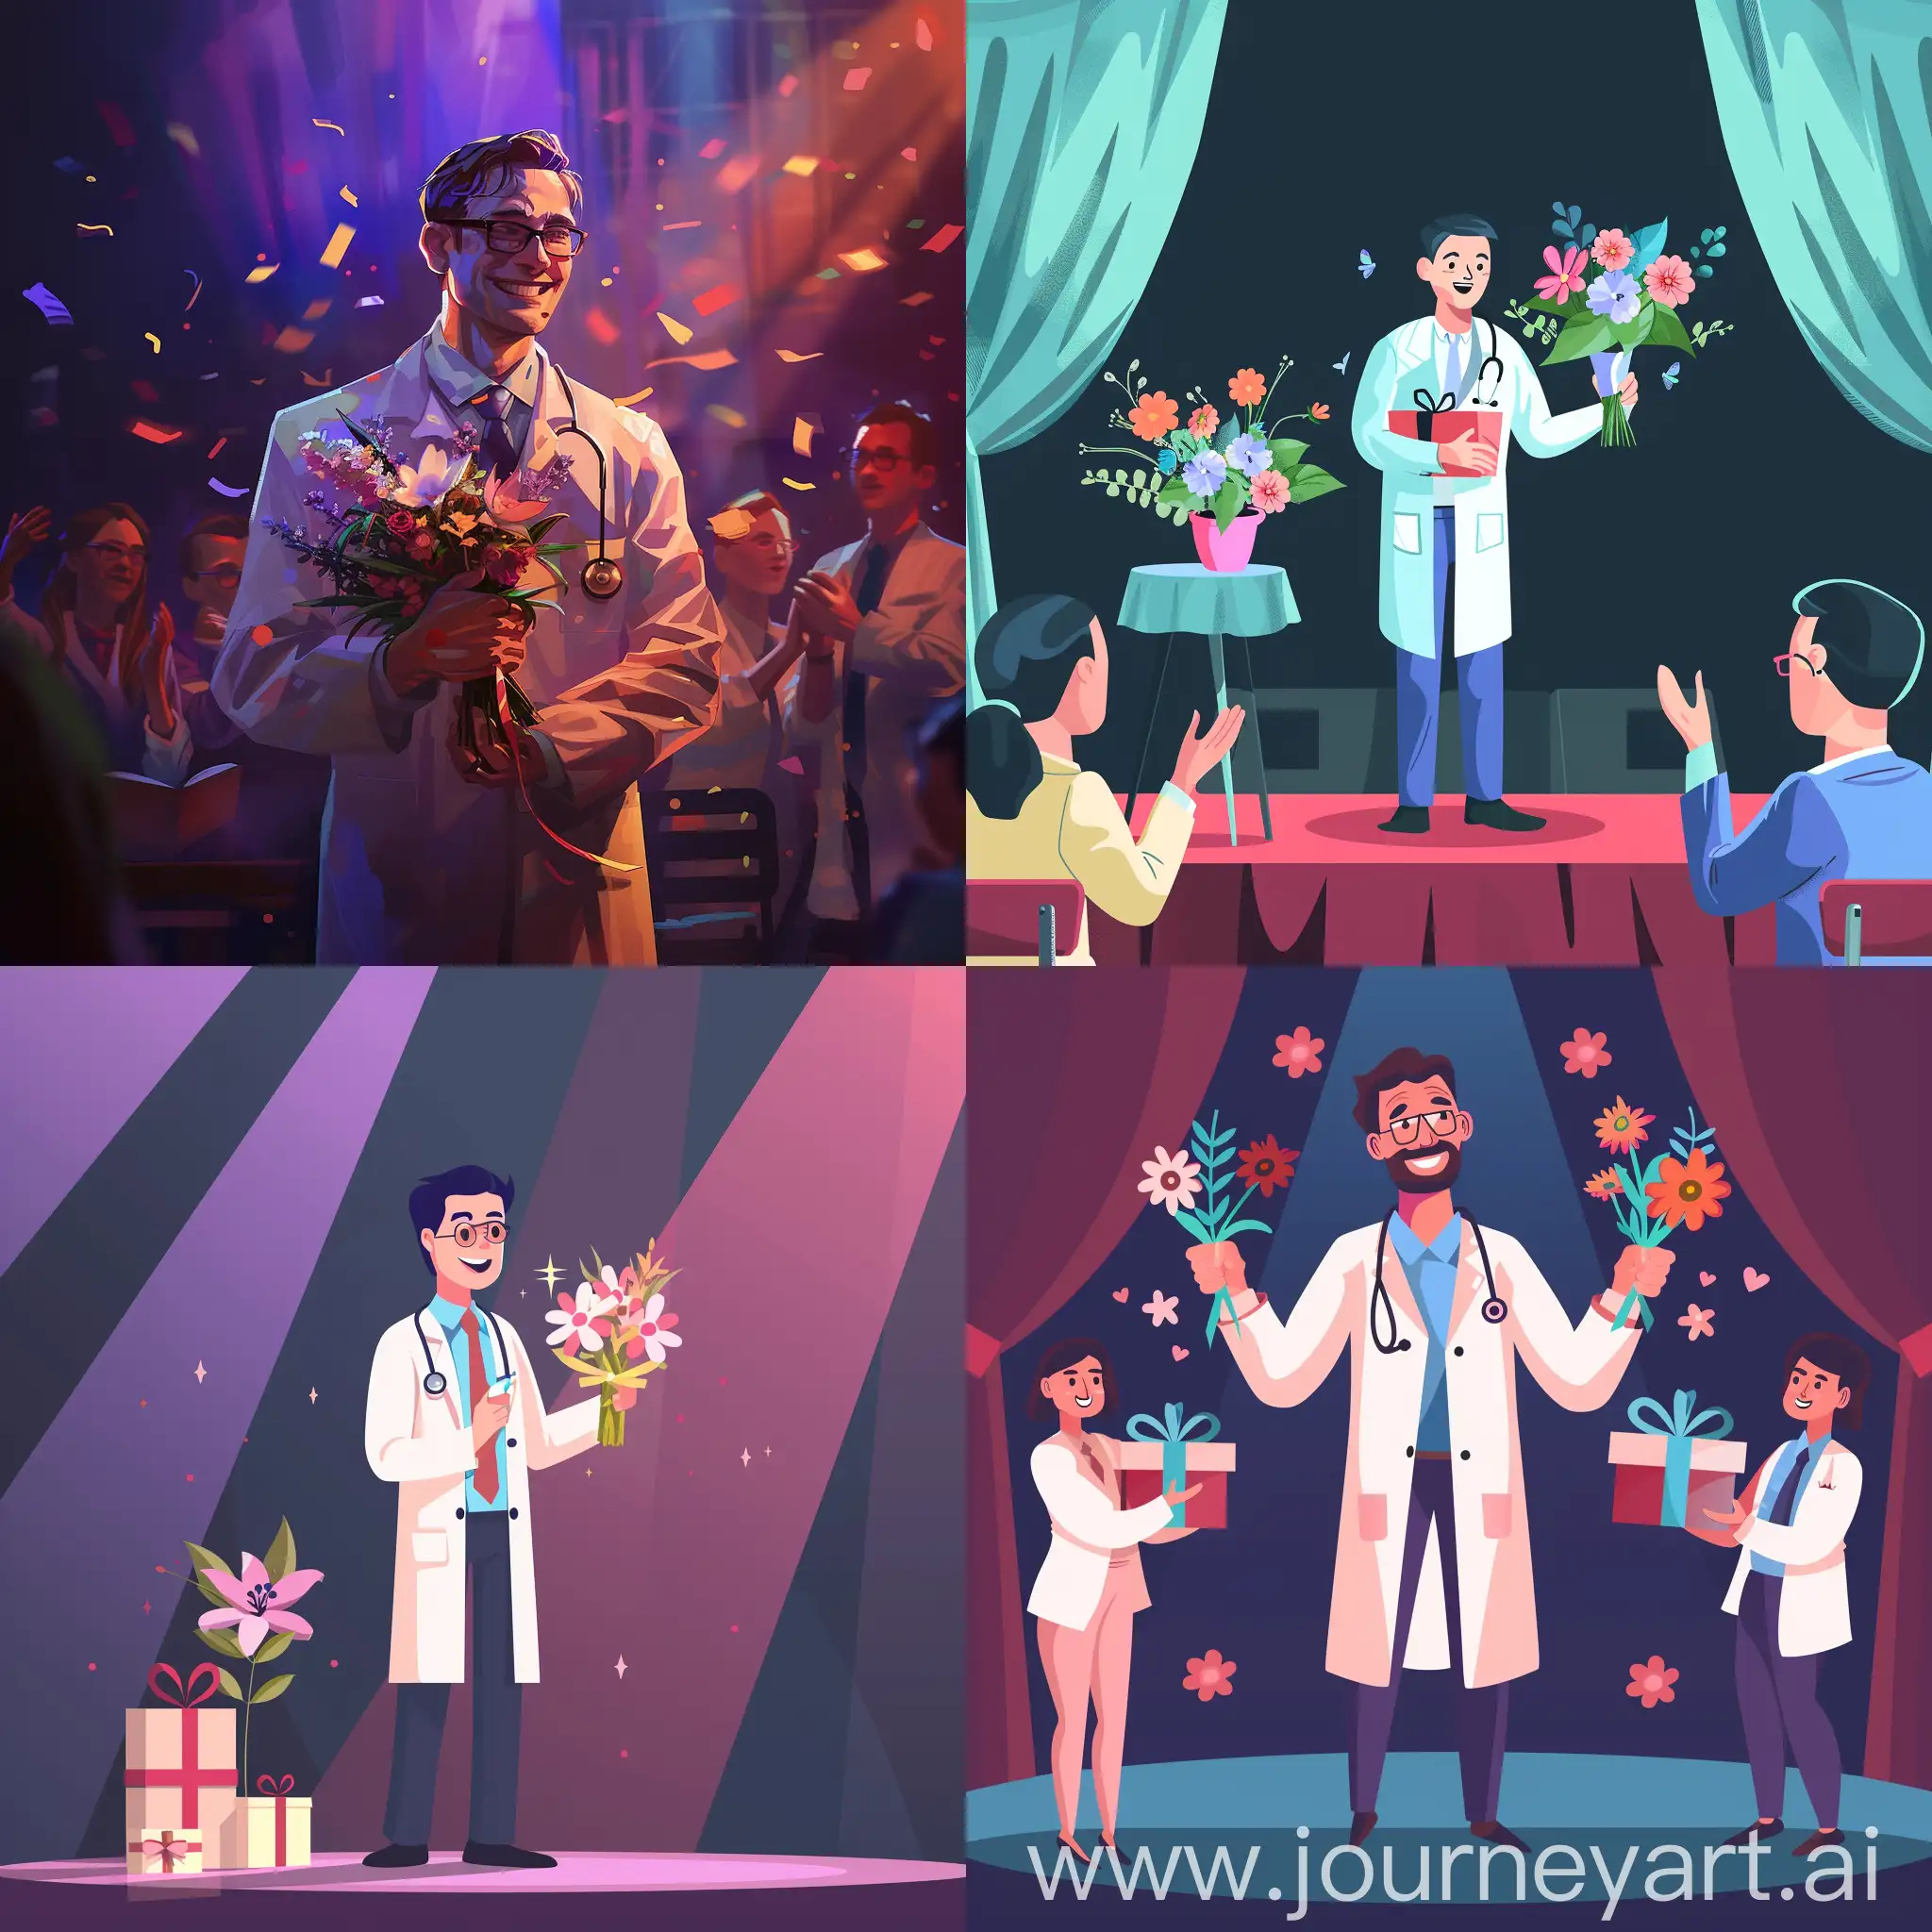 Doctor-in-Suit-Receives-Applause-on-Stage-with-Gifts-and-Flowers